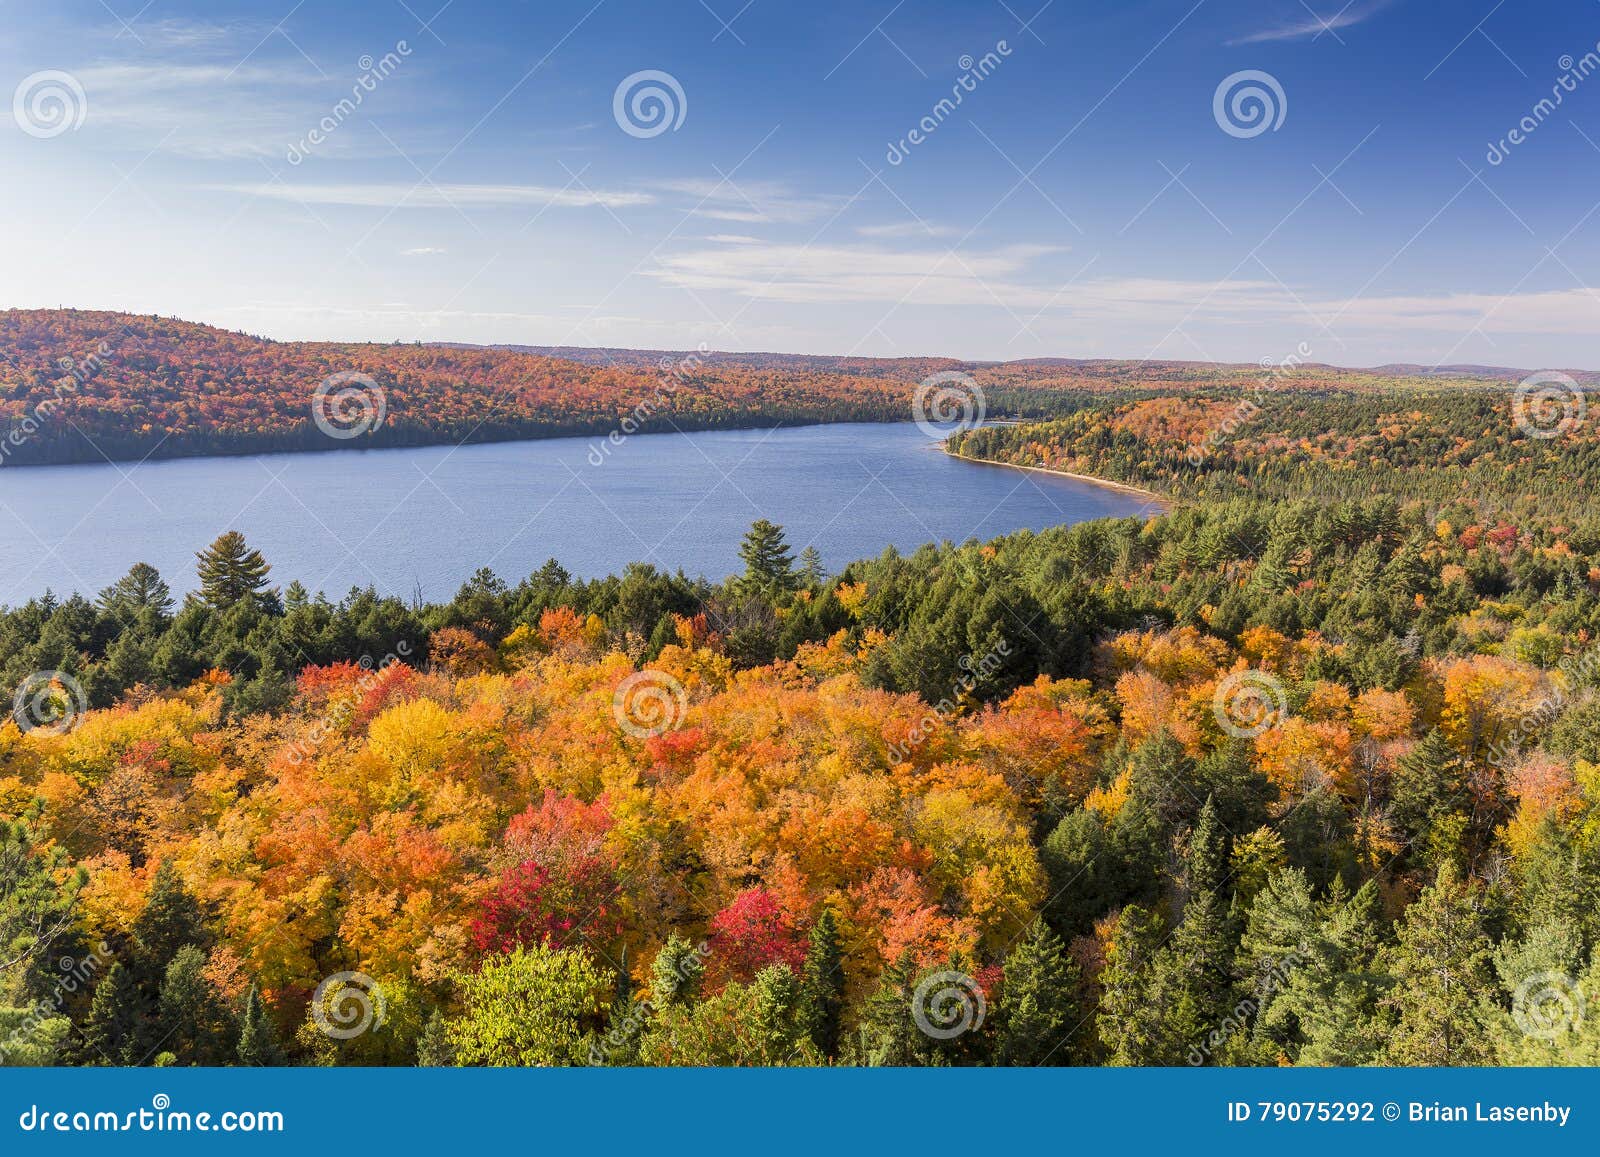 elevated view of lake and fall foliage - ontario, canada